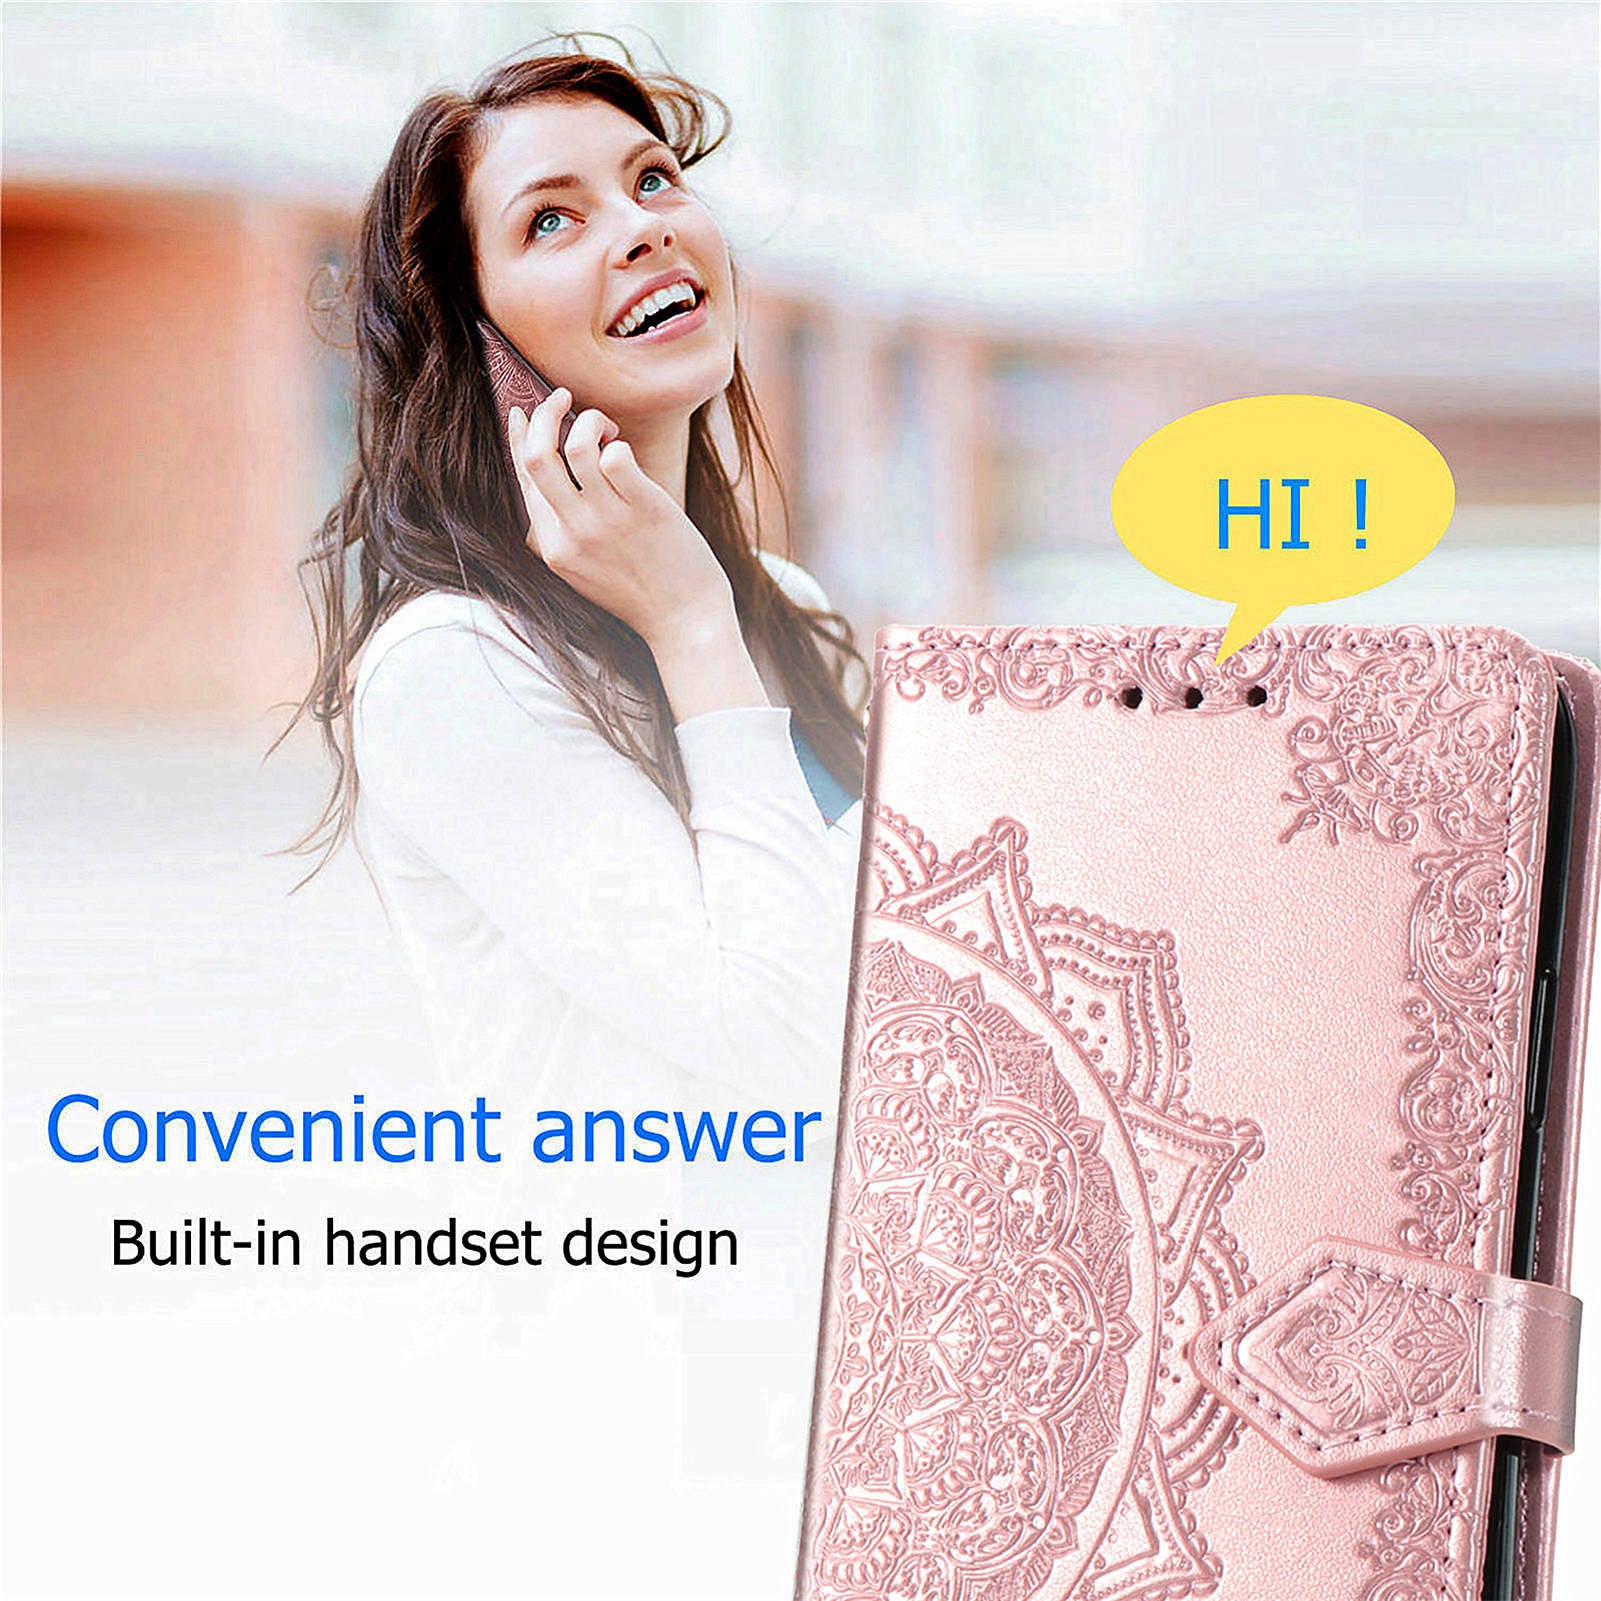 For Transsion Tecno Spark 20C Wallet Case Mandala Flower Leather Phone Cover - Rose Gold